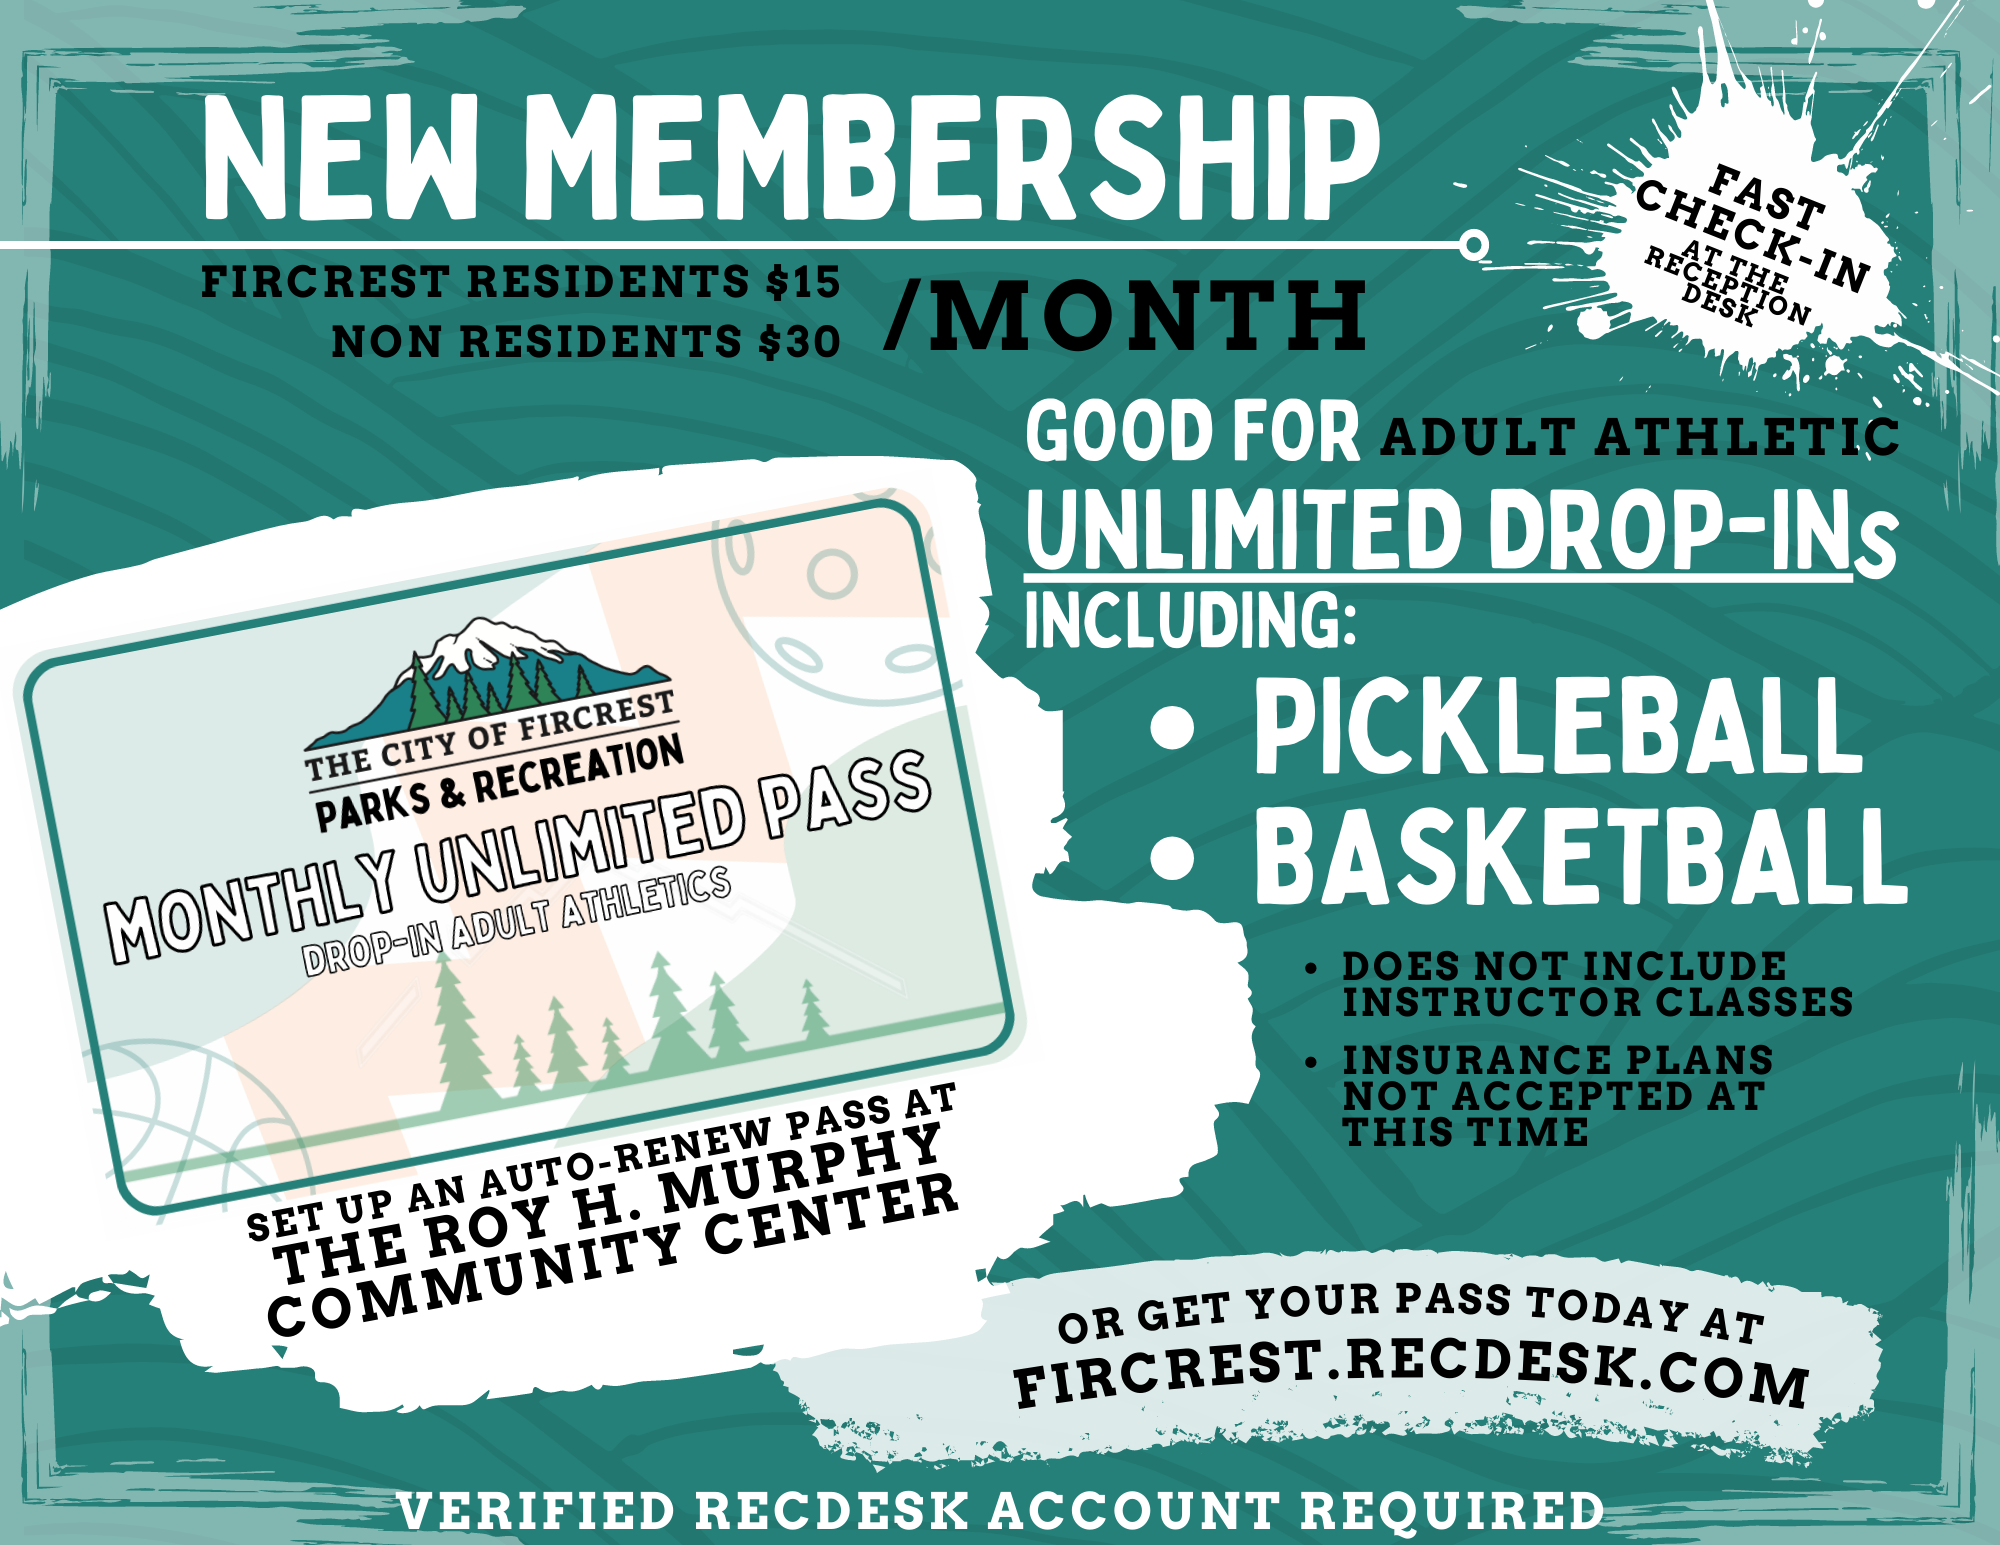 New Membership Graphic with text that reads: New Membership - Fast Check-in at the reception desk - Fircrest Residents $15/month - Non-Residents $30/month - Good for Adult Athletic Unlimited Drop-ins including: pickleball, basketball - Does not include instructor classes. Insurance plans not accepted at this time. The City of Parks and Recreation Monthly Unlimited Pass Drop-In Adult Athletics - Set up an auto-renew pass at The Roy H. Murphy Community Center or get your pass today at fircrest.recdesk.com verified recdesk account required.